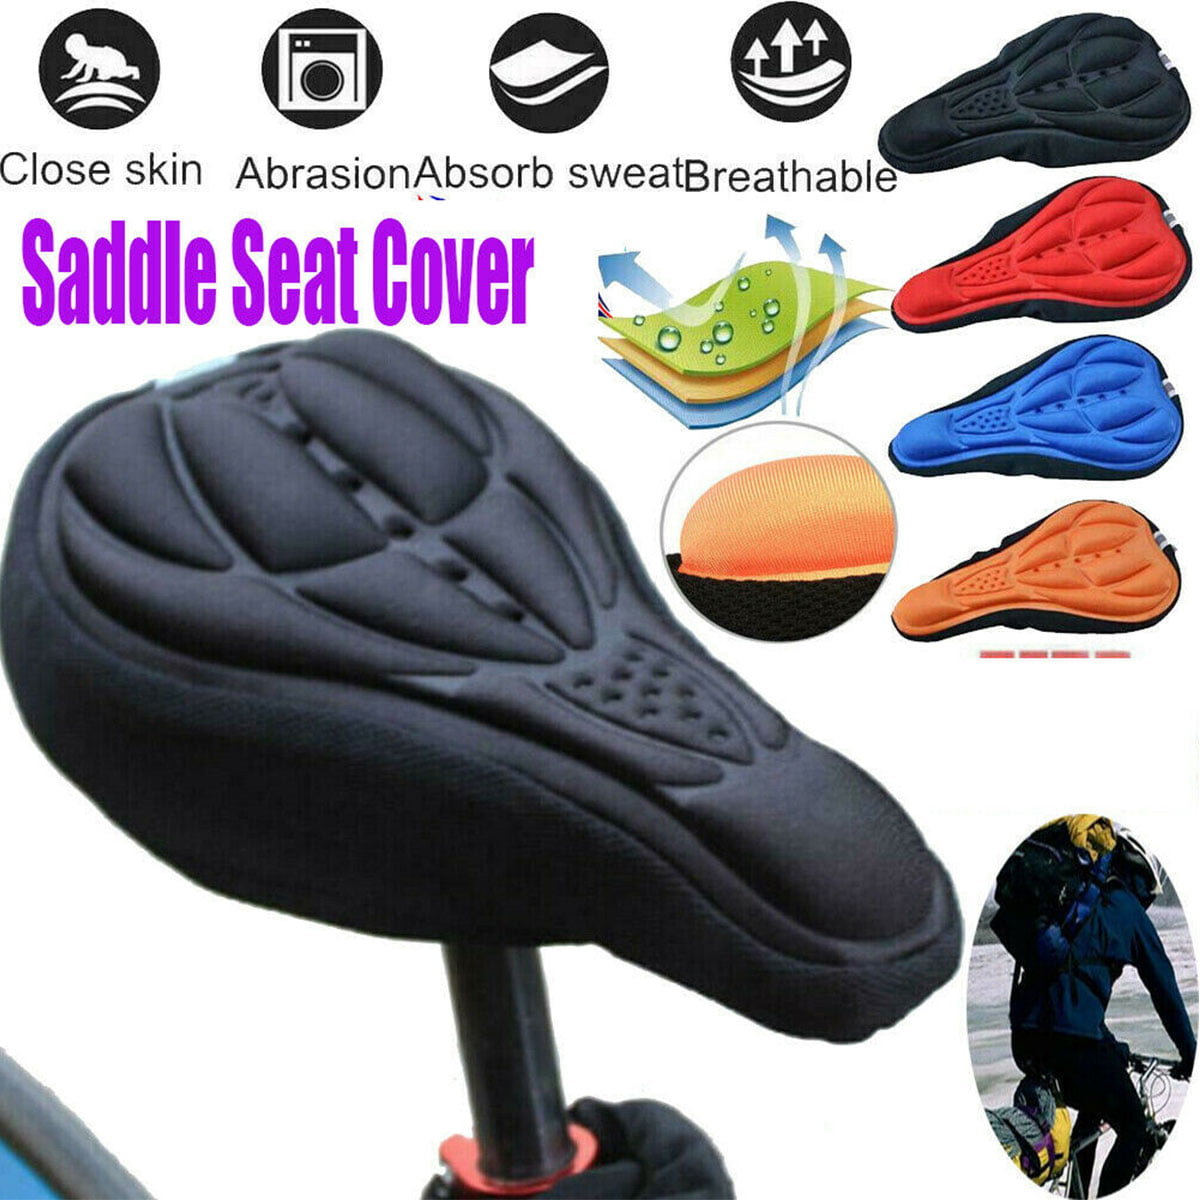 Premium Quality Bicycle Saddle Pad with Soft Gel for Women and Men Great for Indoor Cycling Class and Stationary Bikes 11 inches x 7 inches Most Comfortable Exercise Bike Seat Cushion Cover -